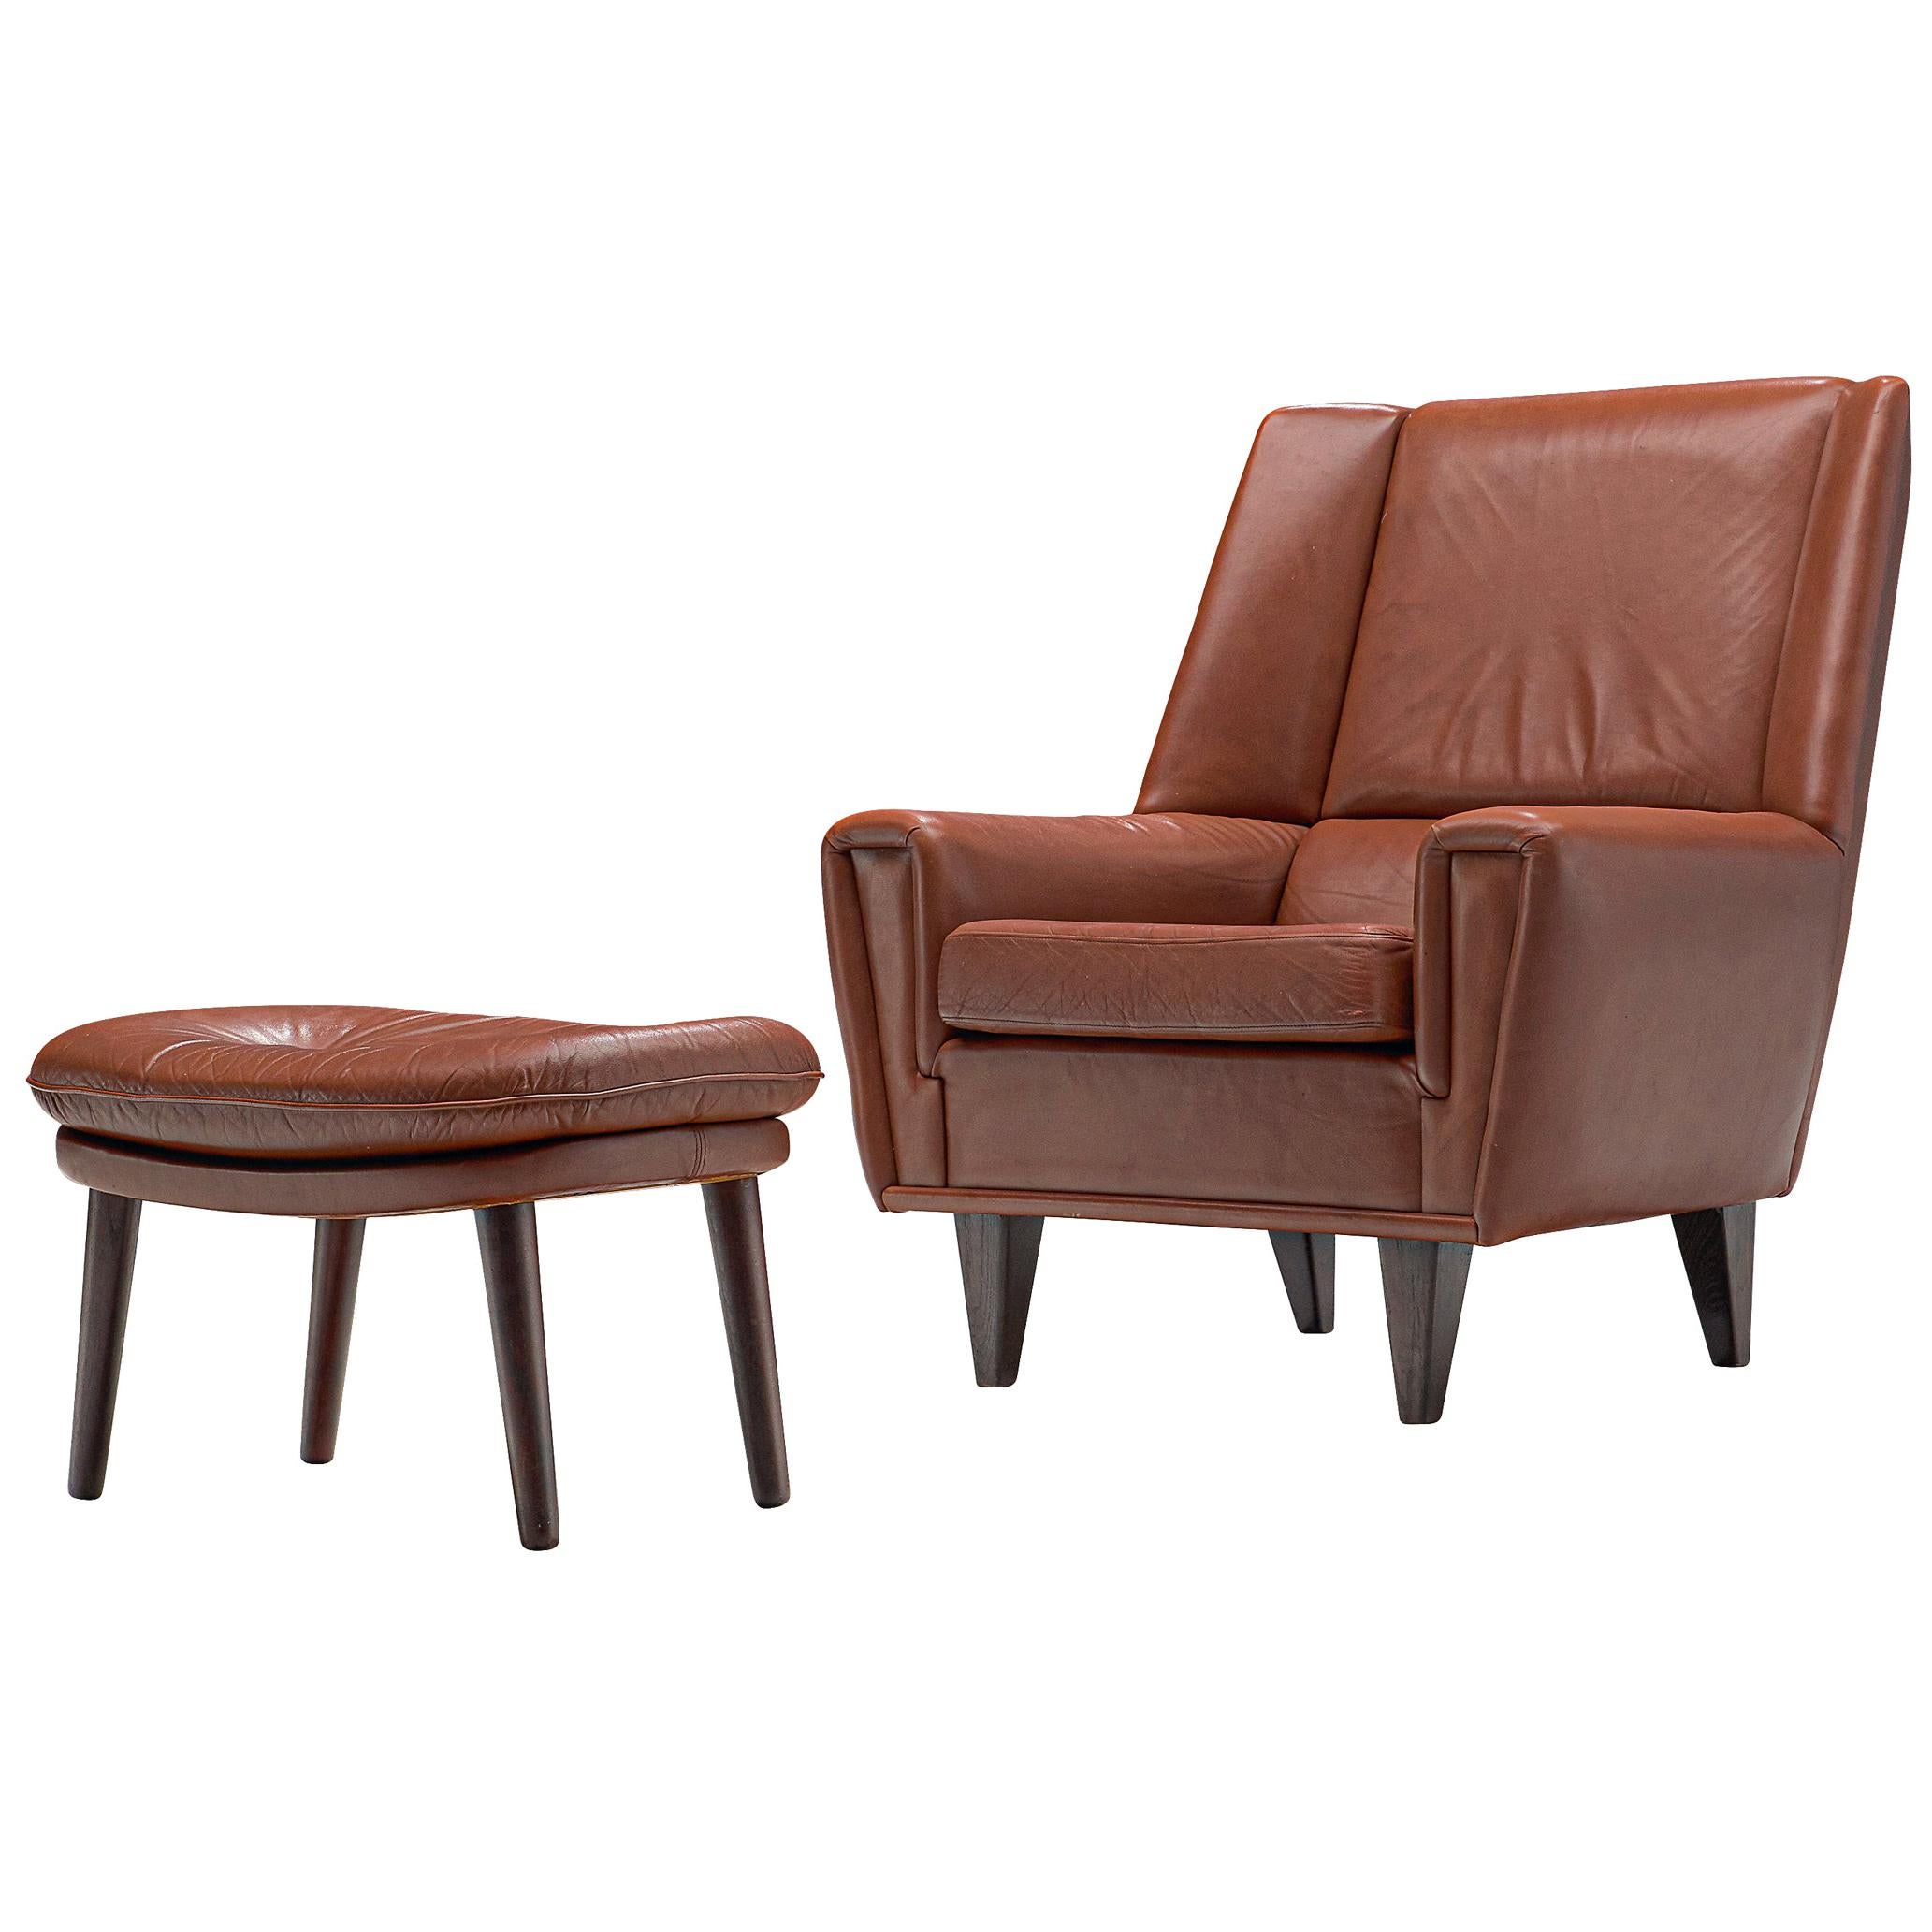 Danish Lounge Chair with Ottoman in Brown Cognac Leather, circa 1960